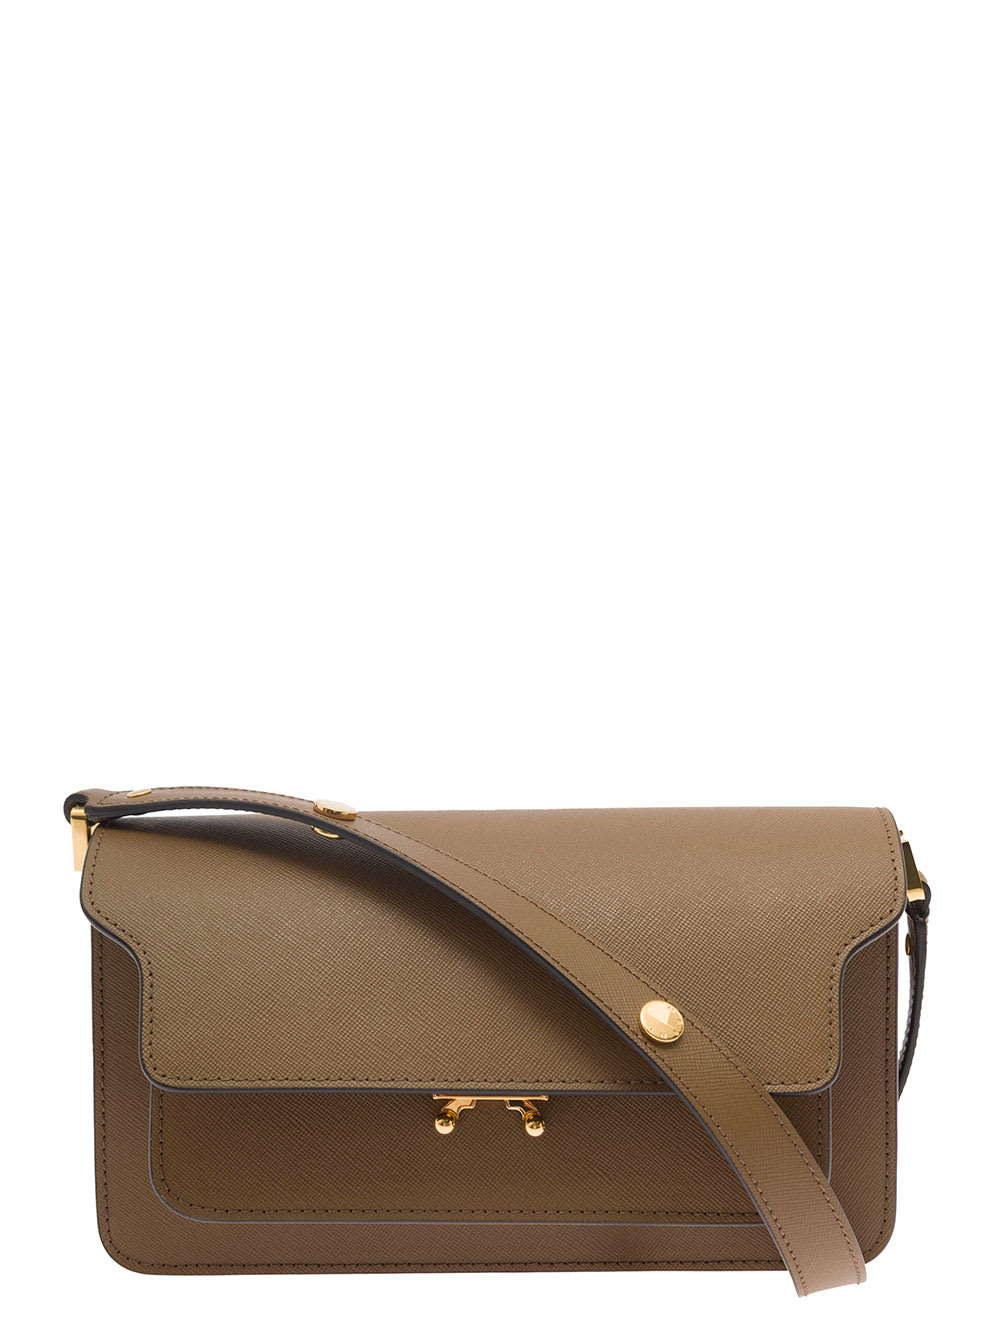 Marni Trunk Brown Shoulder Bag With Push-Lock Fastening In Leather Woman